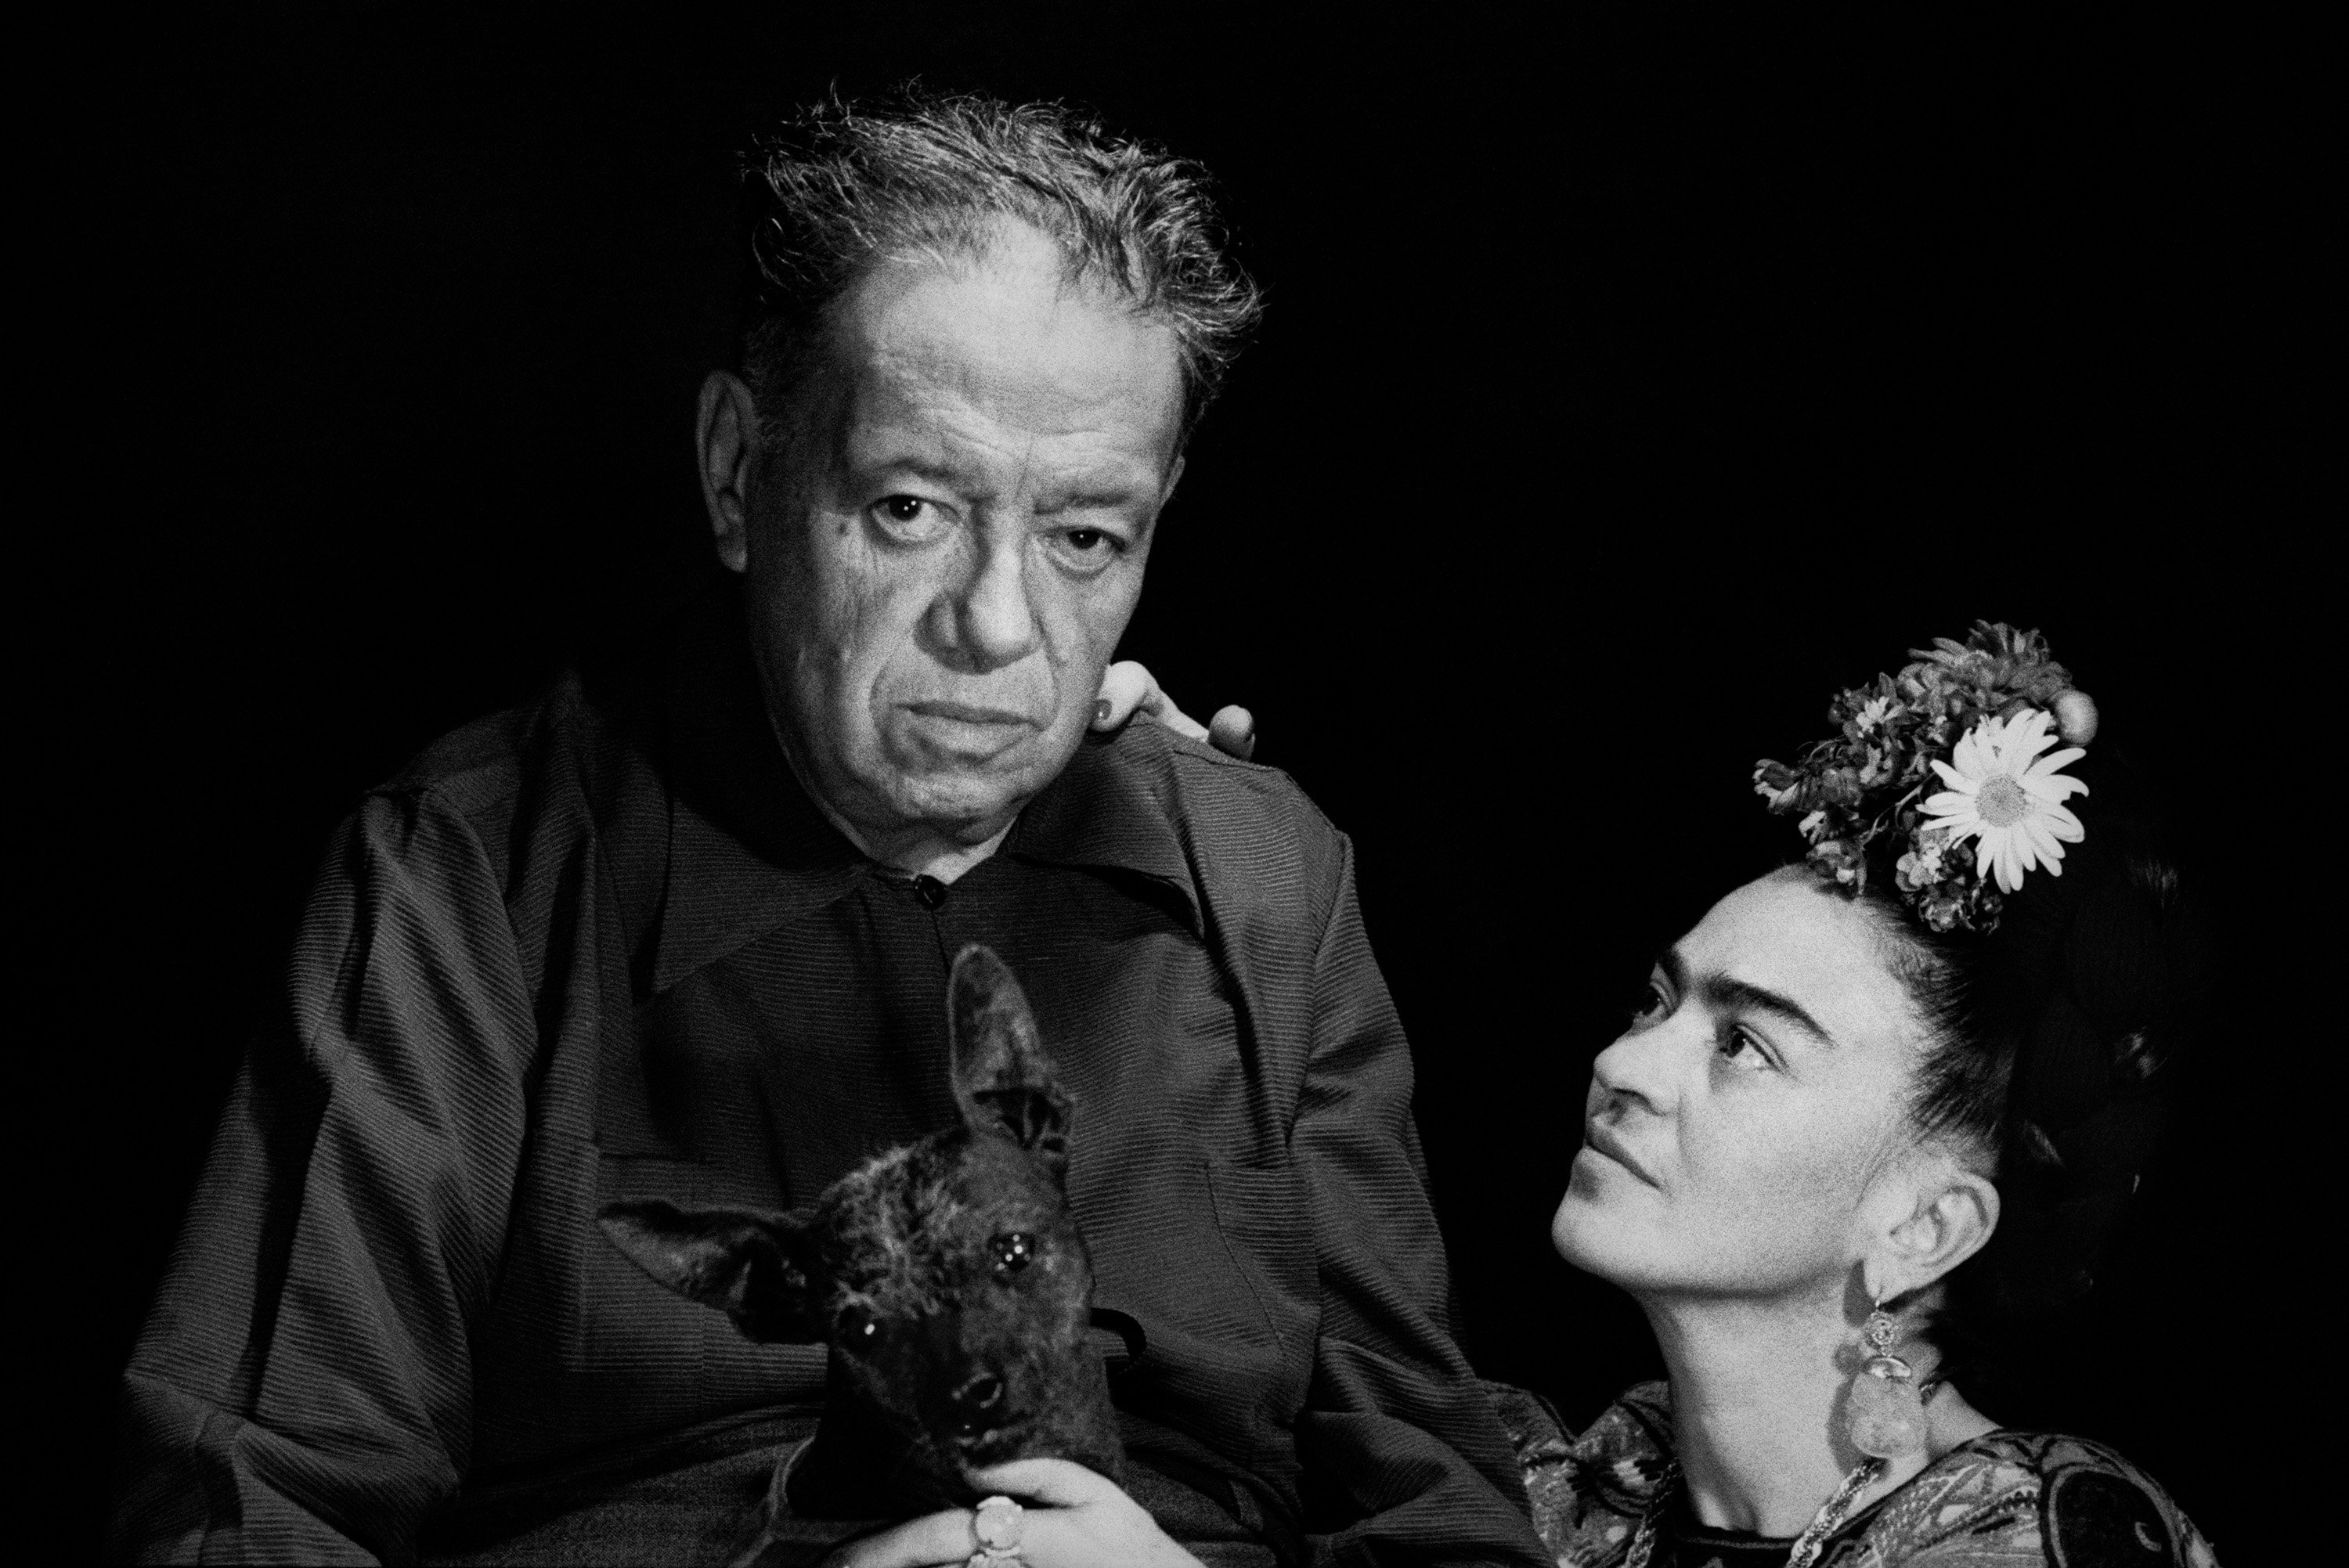 See Revealing, Long-Lost Photos of Frida Kahlo and Einstein | artnet News